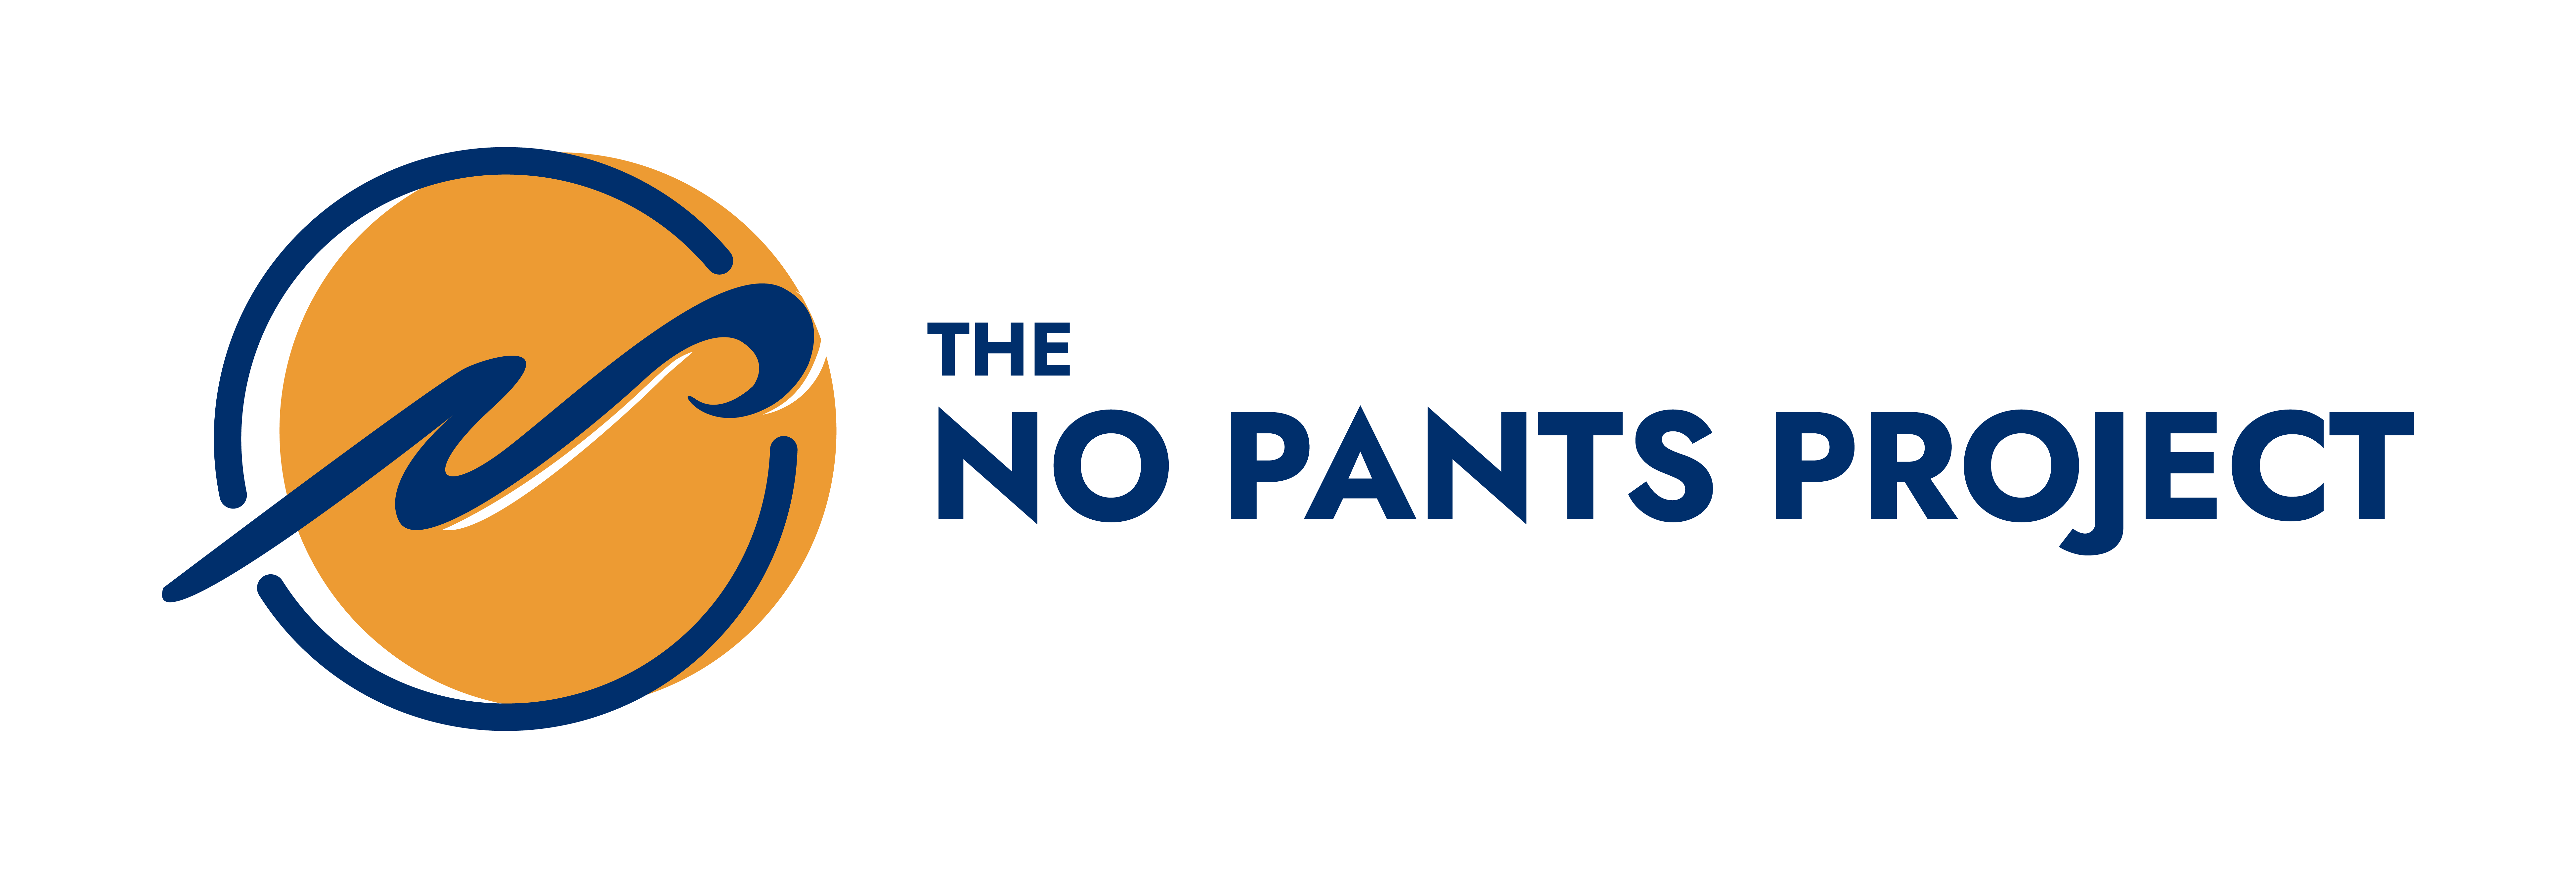 The No Pants Project Blog